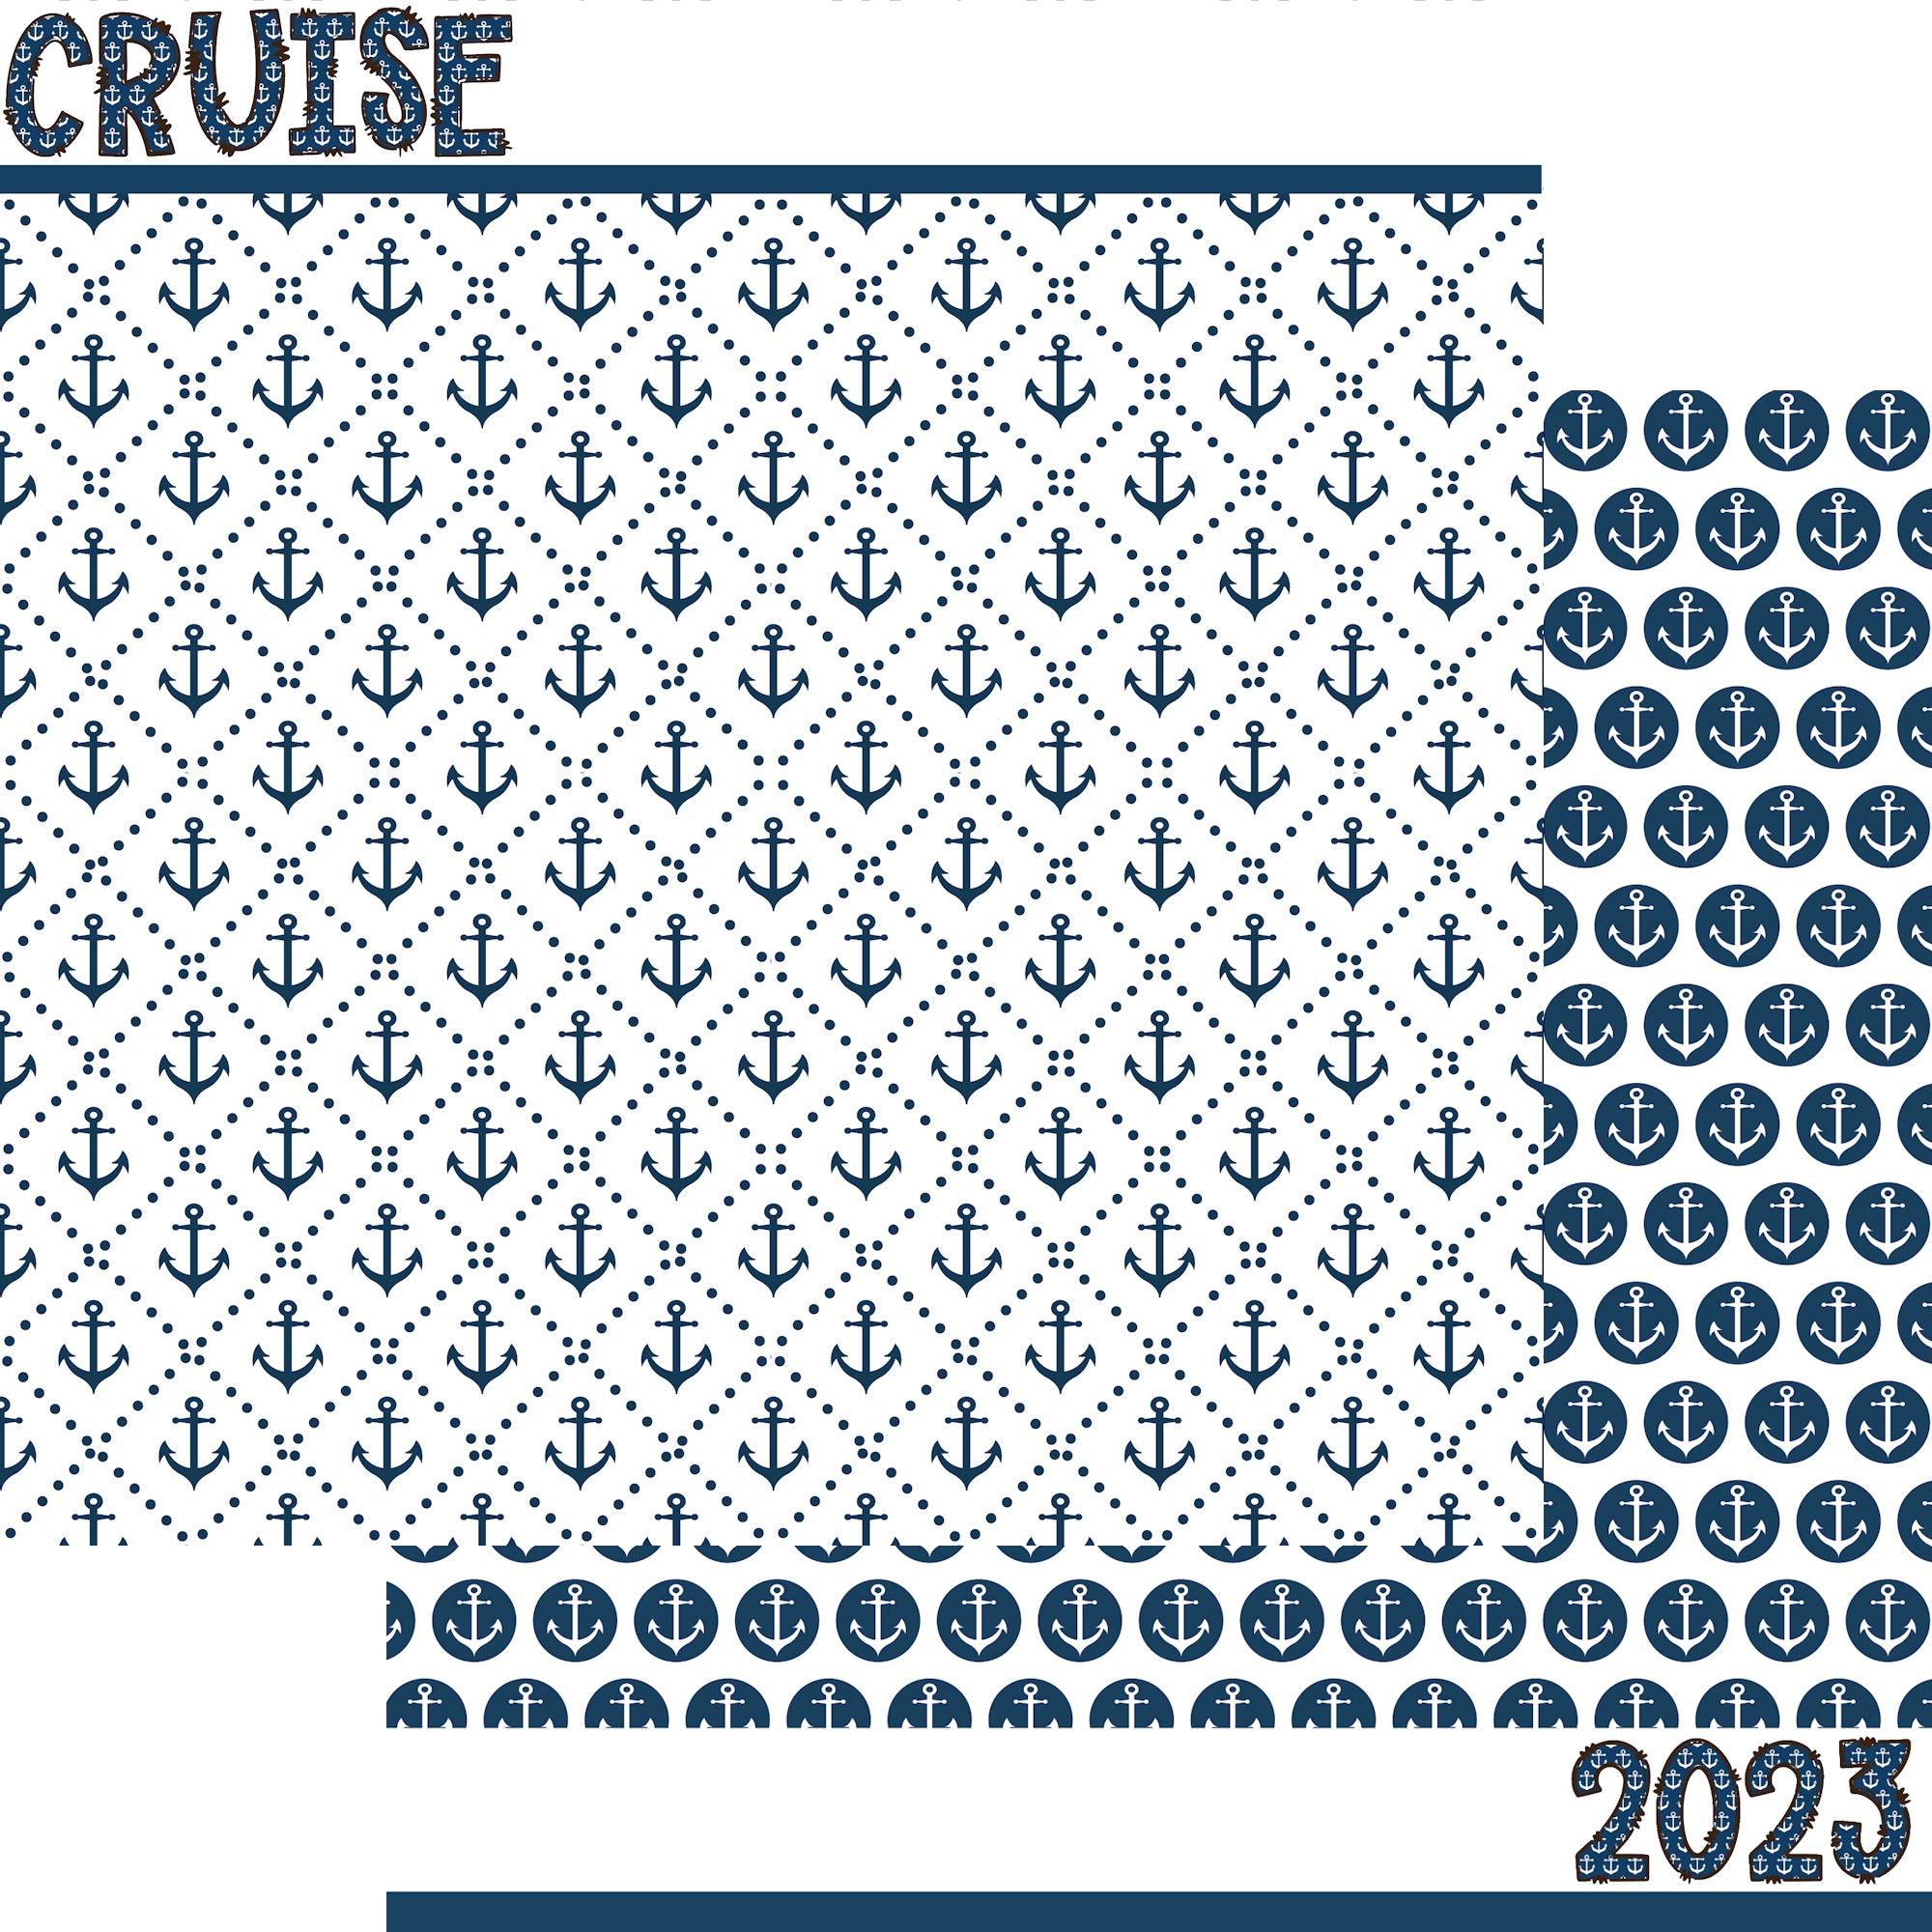 Cruise Collection Cruise 2023 12 x 12 Double-Sided Scrapbook Paper by SSC Designs - Scrapbook Supply Companies